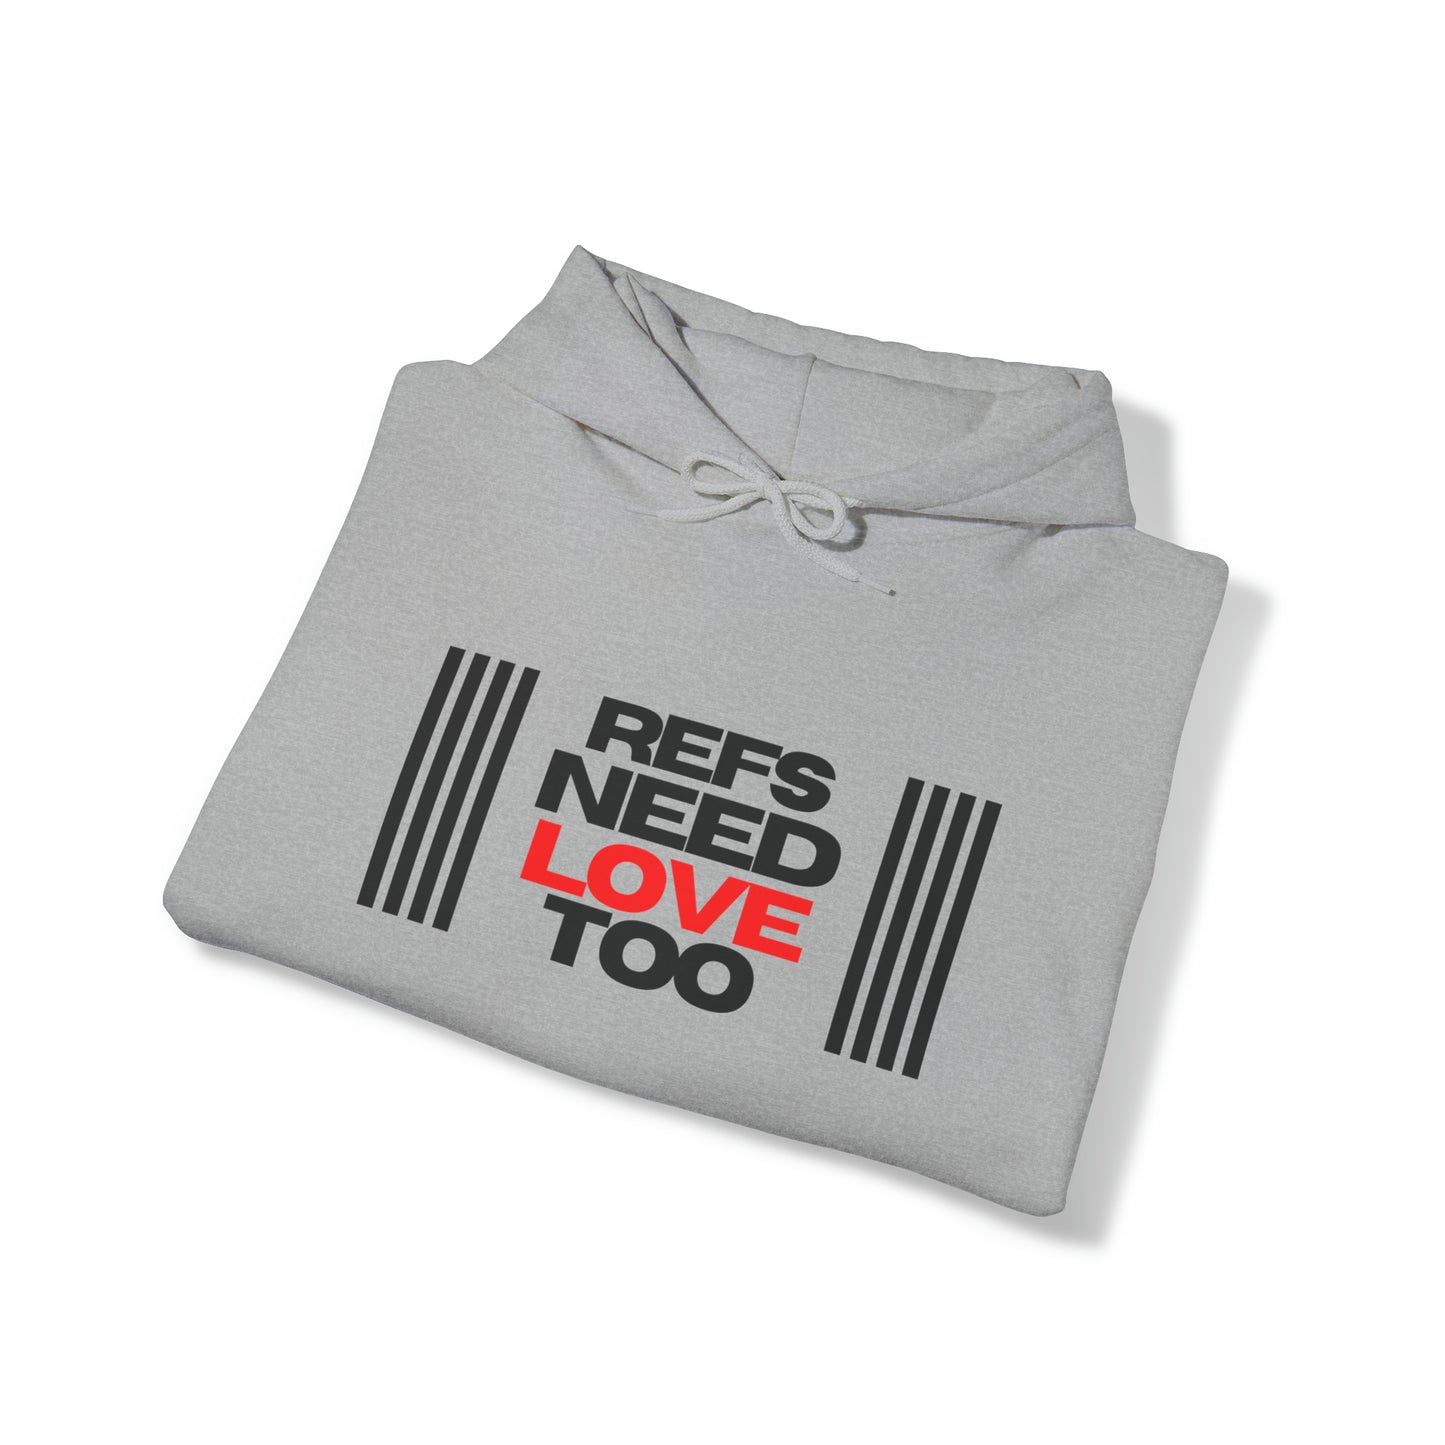 Refs Need Love Too Unisex Heavy Blend Hooded Sweatshirt | Referee apparel | For Sports Officials | Great Gift for Refs | Referee Hoodie | Screen print